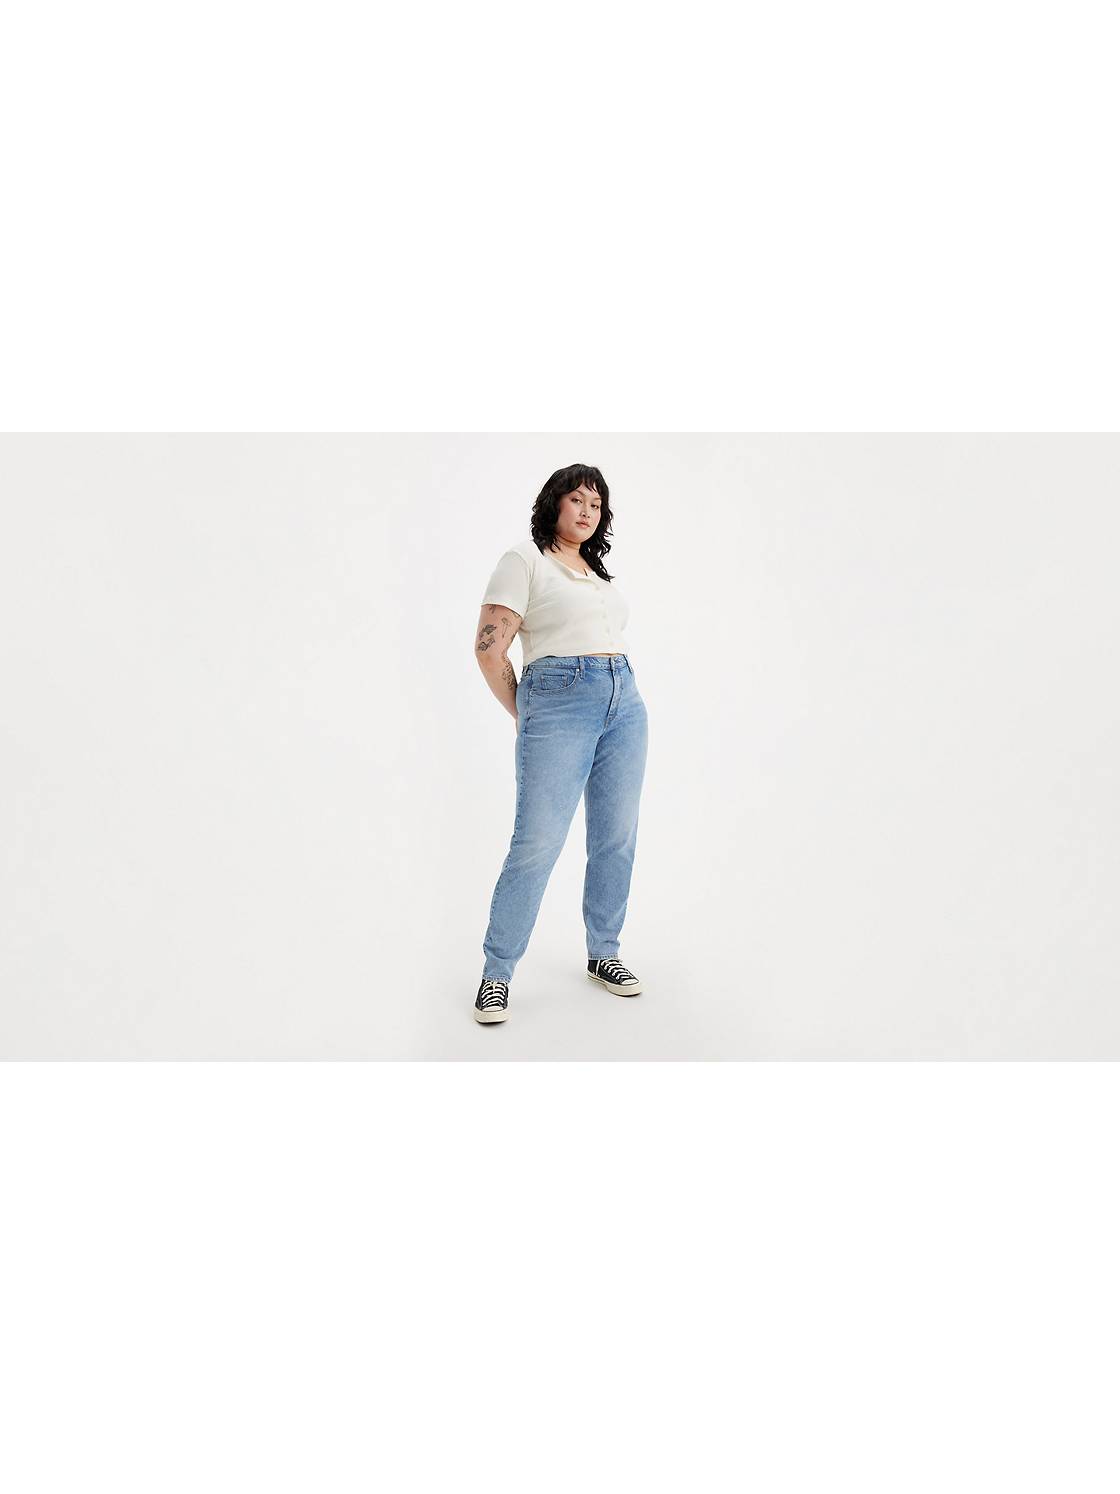 '80s Mom Jeans (Plus Size) 1